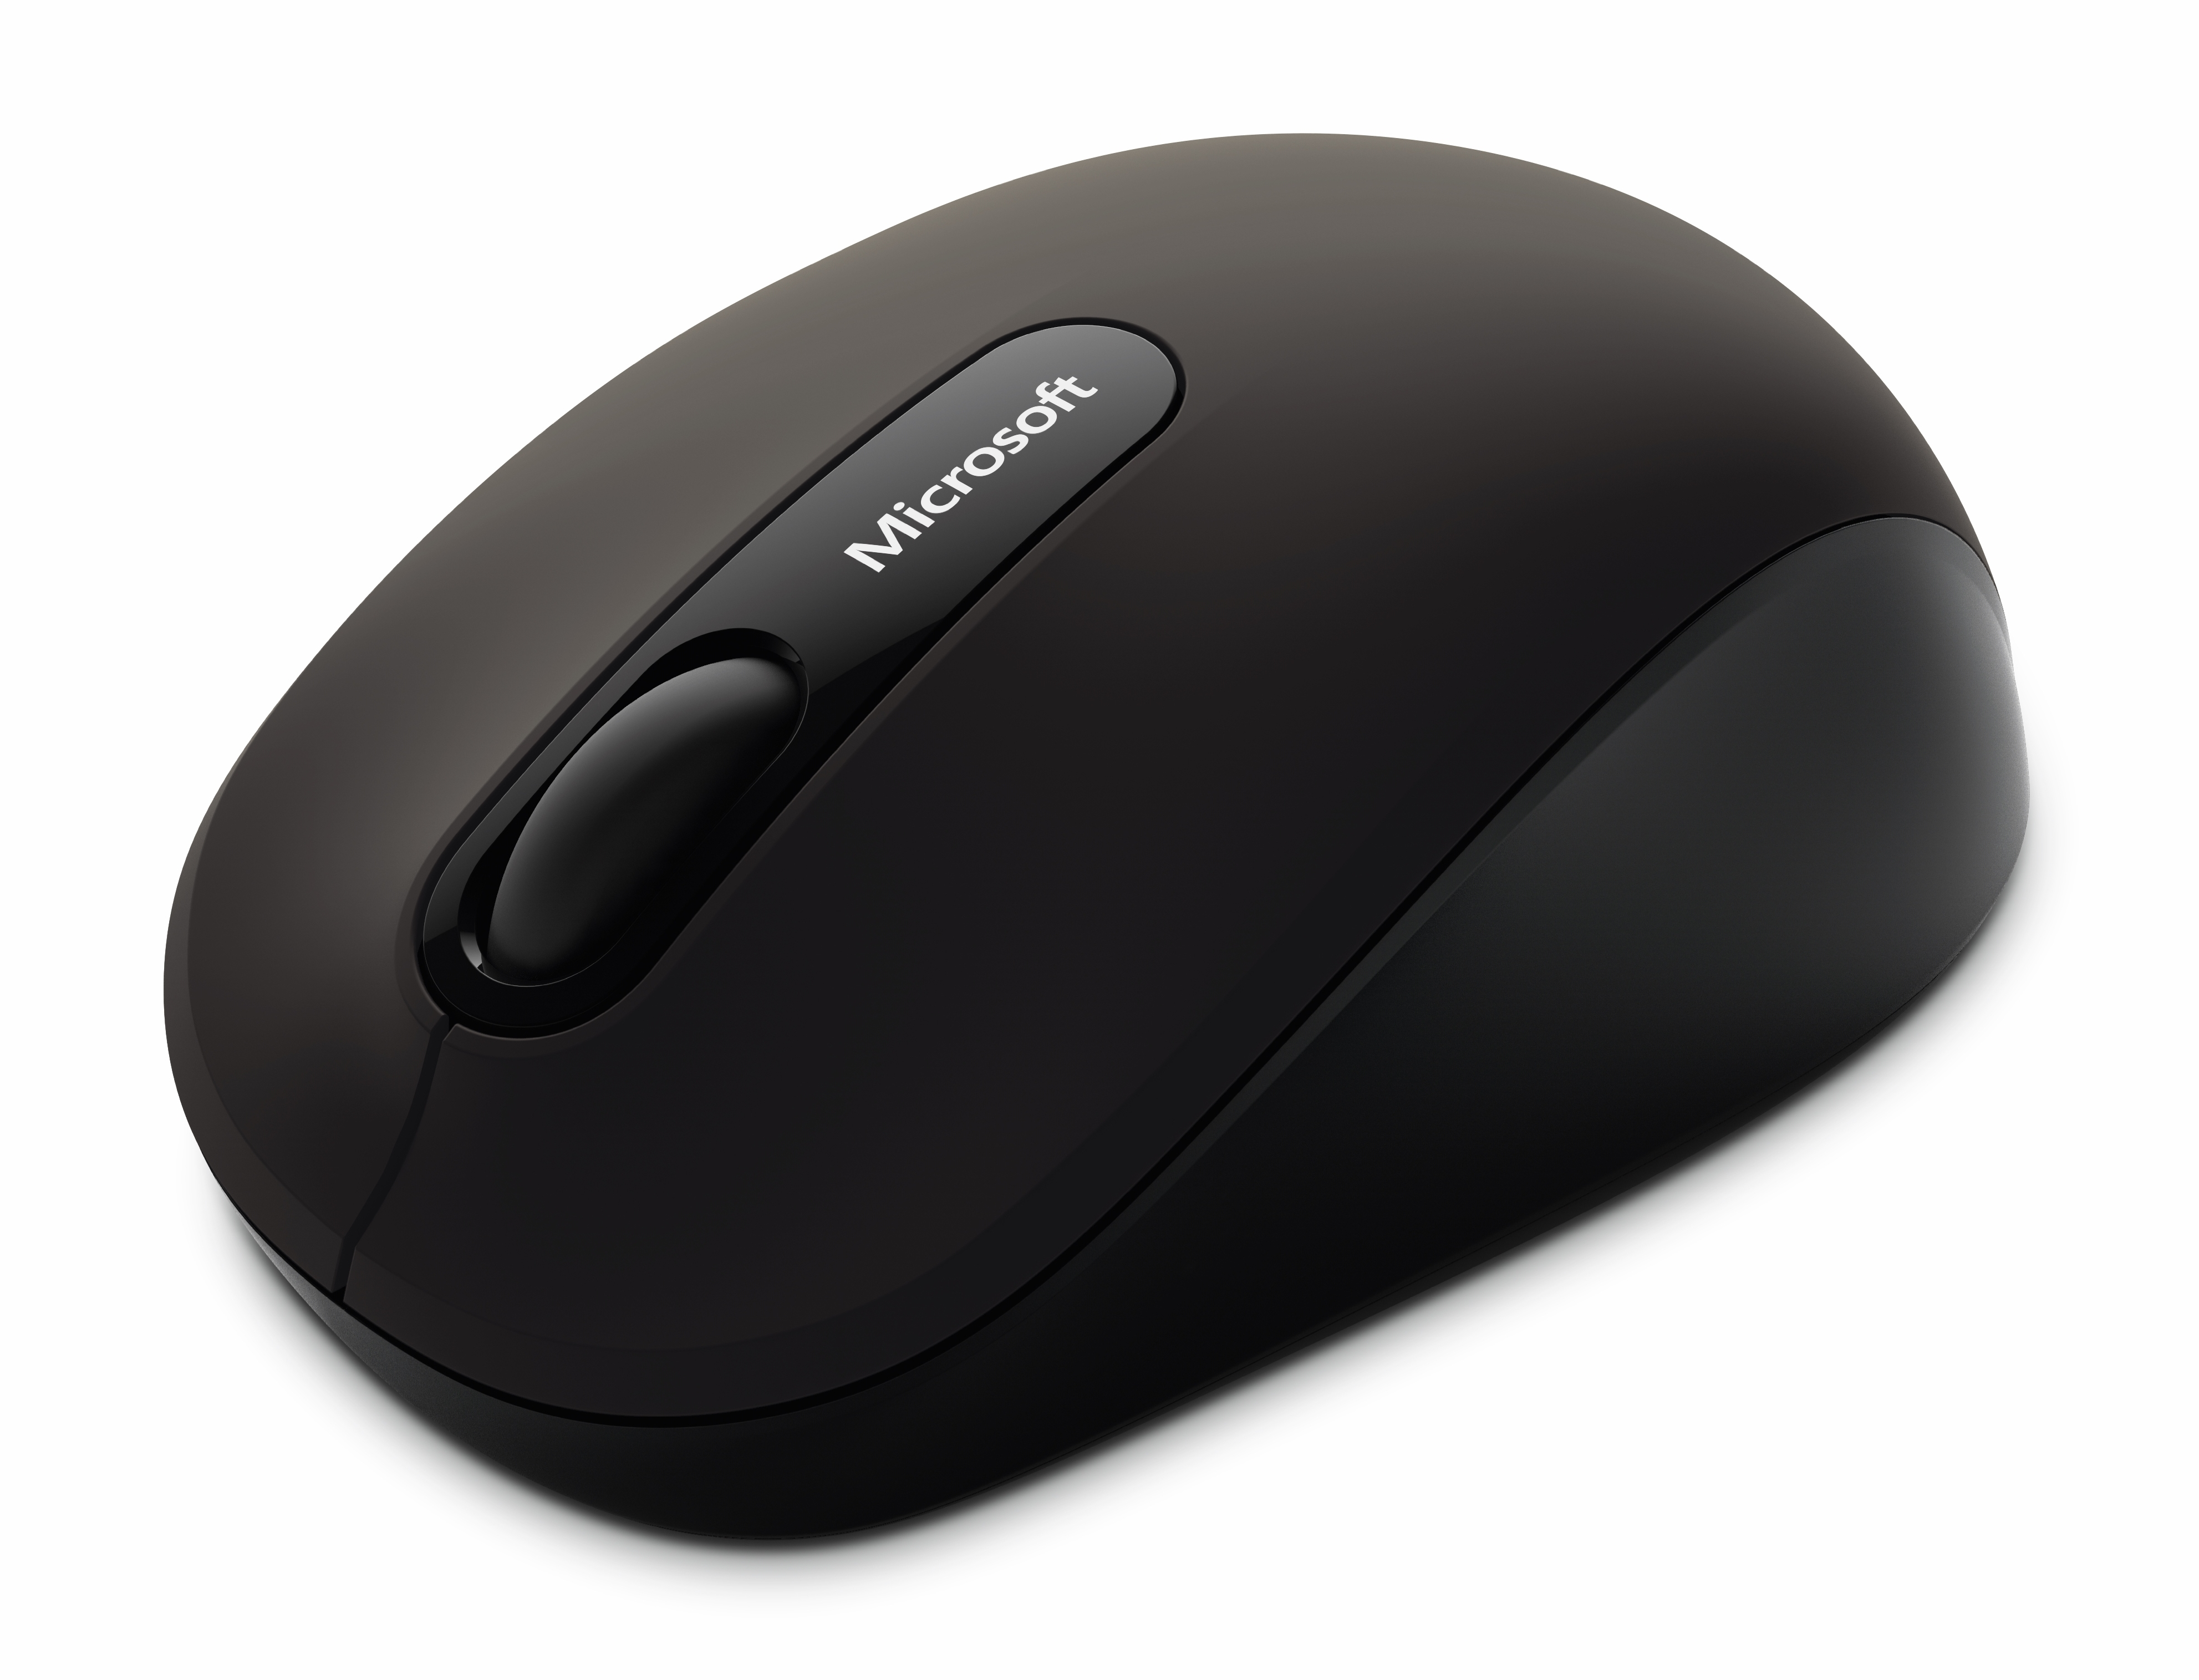 microsoft bluetooth mouse software